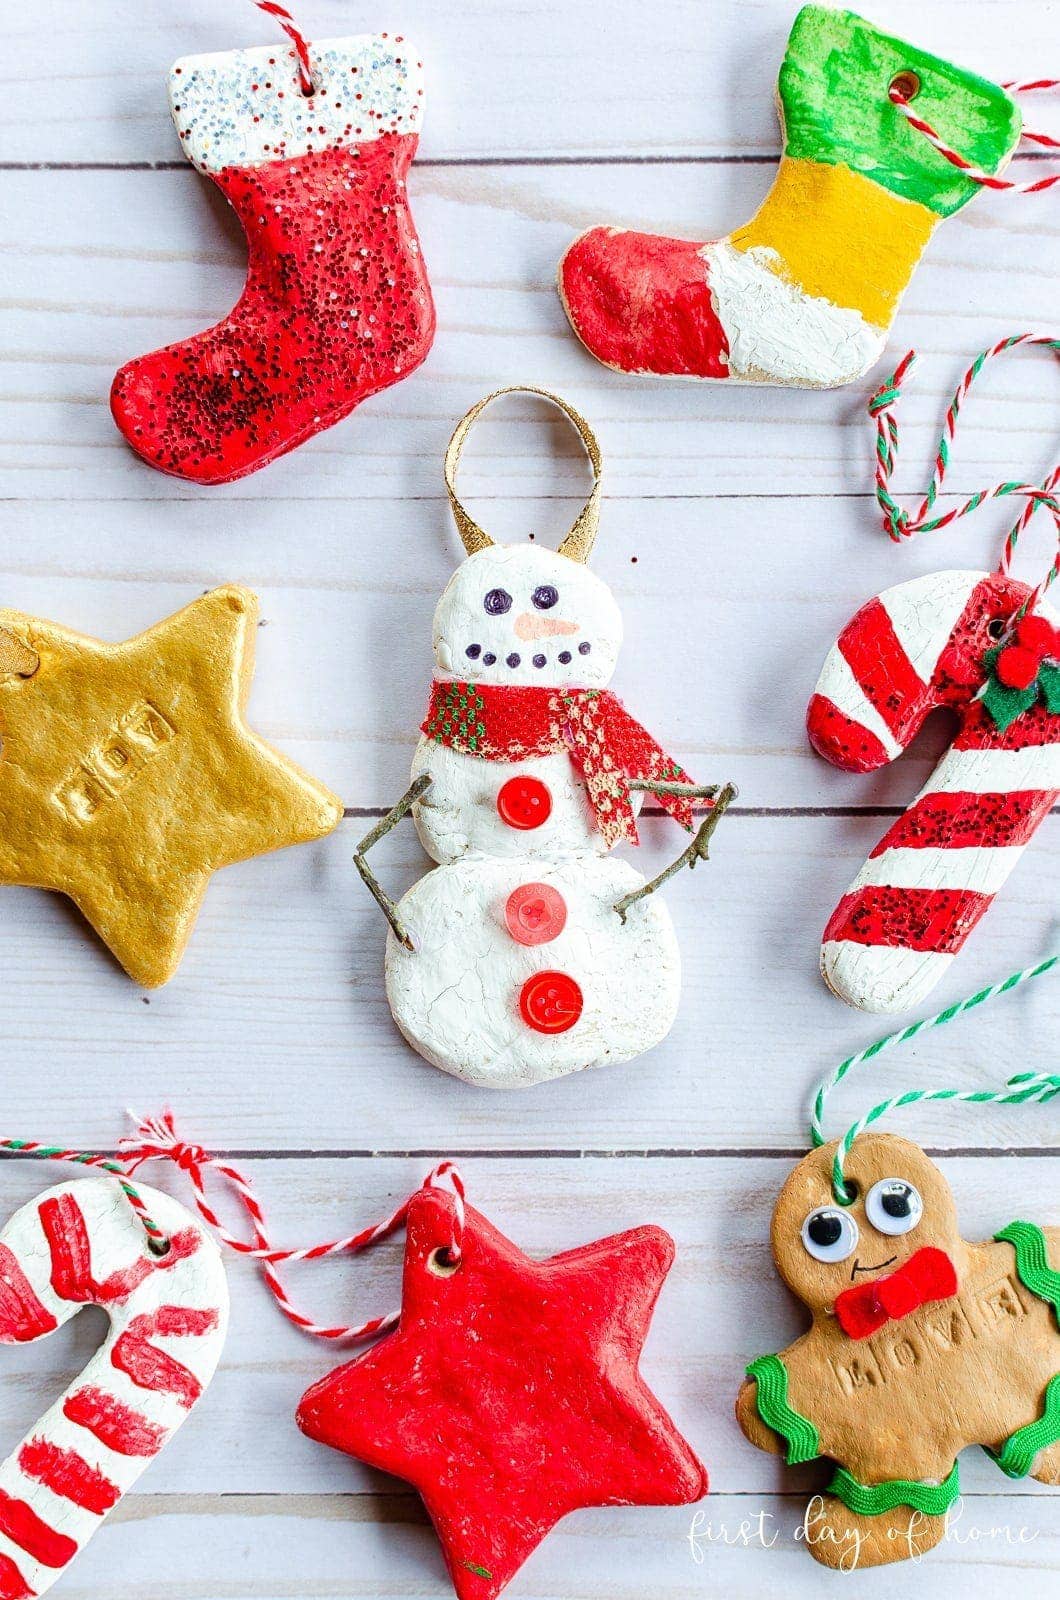 Colorful salt dough ornaments made from simple 3-ingredient salt dough recipe made for kids